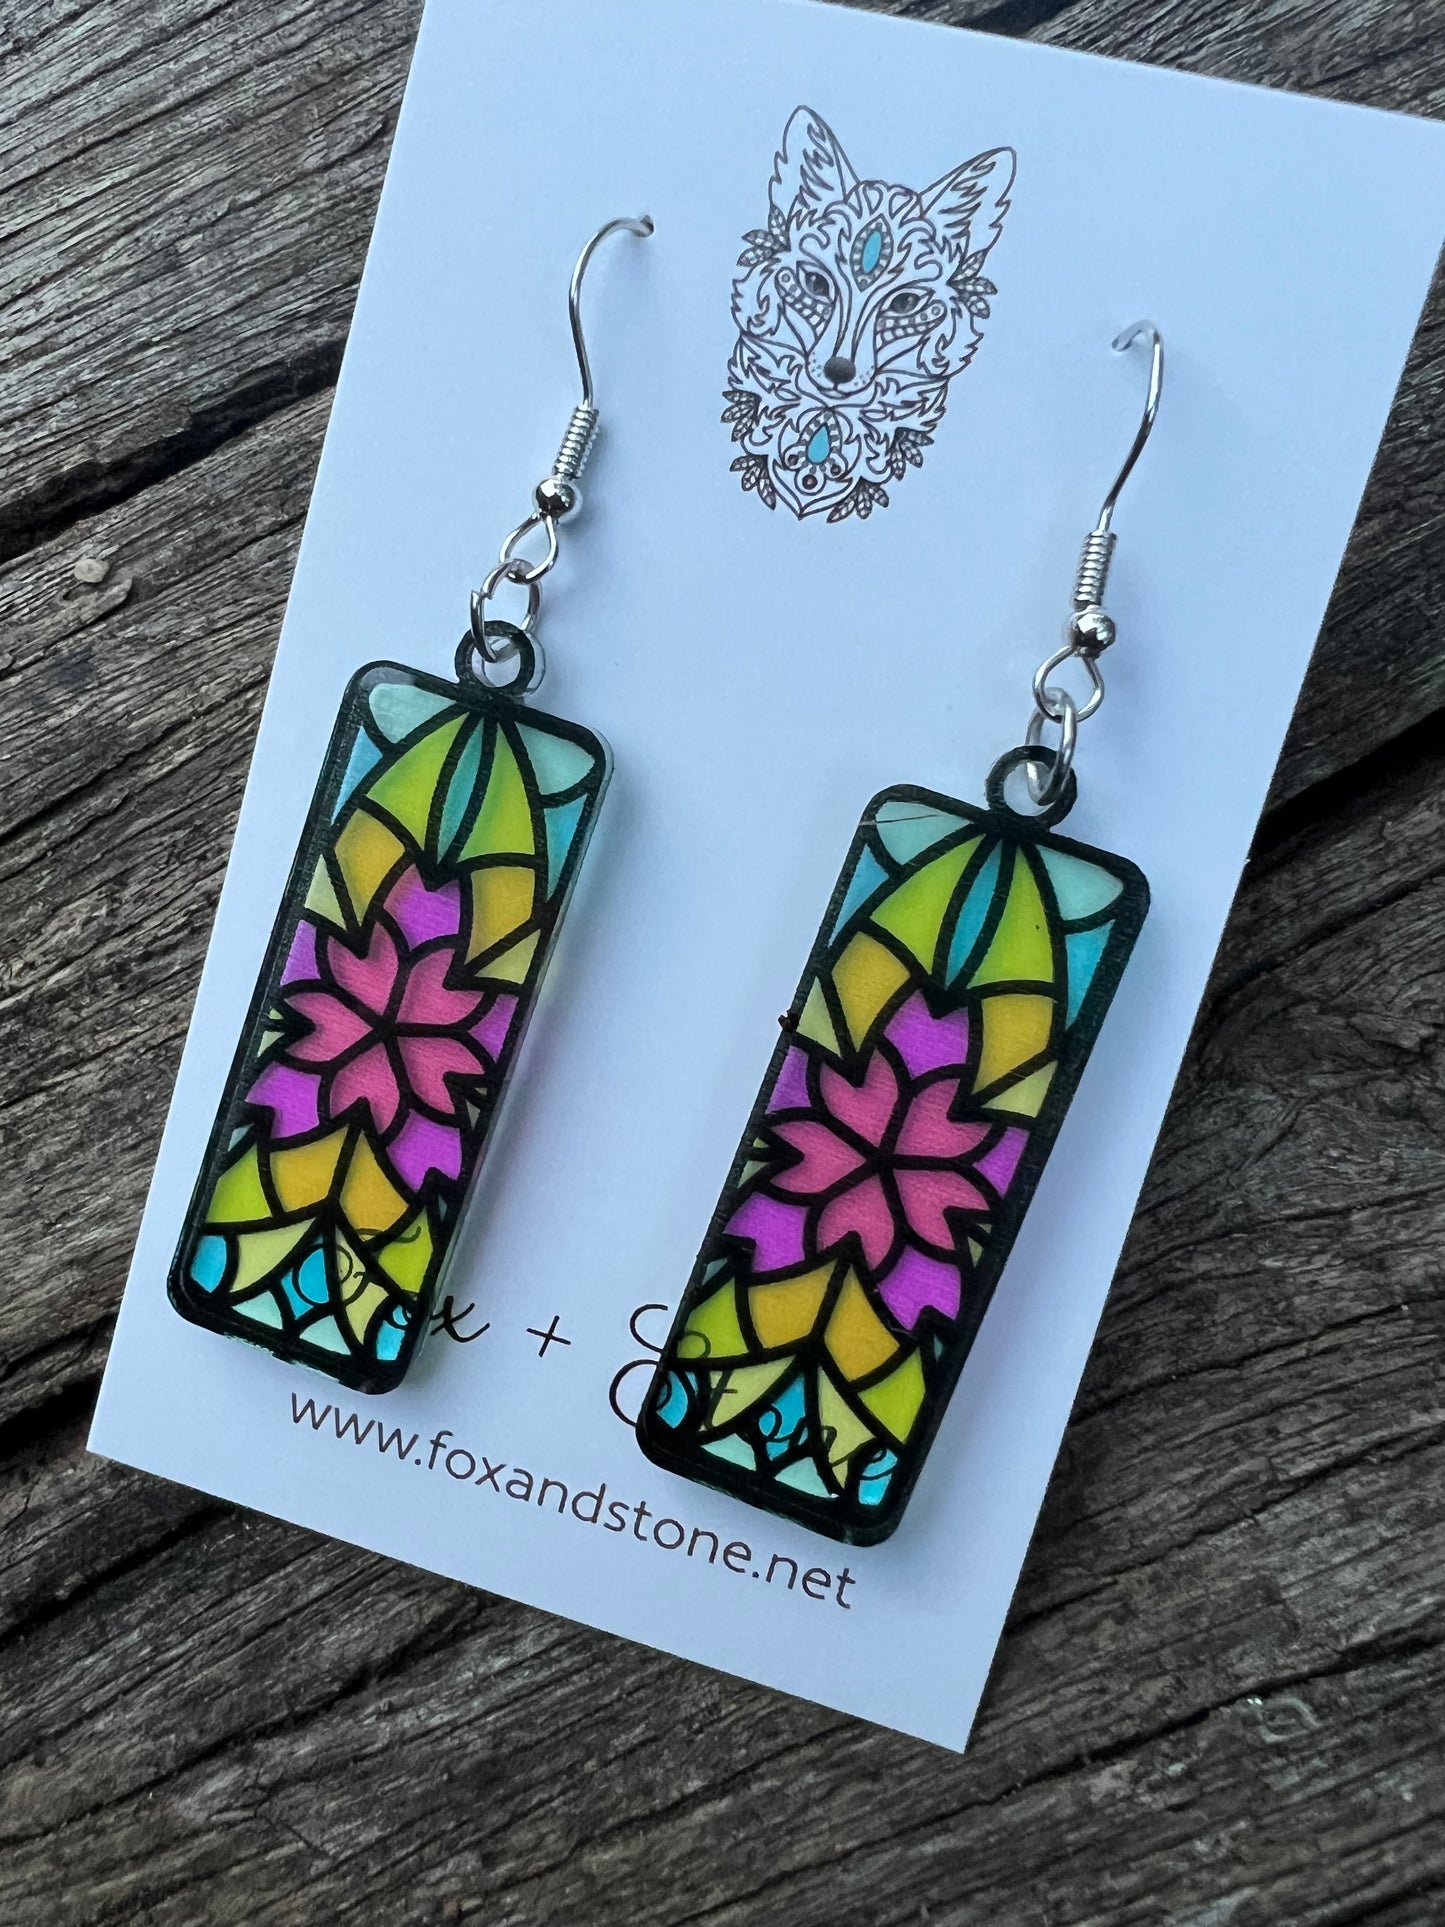 Valerie Faux Stained Glass Earrings